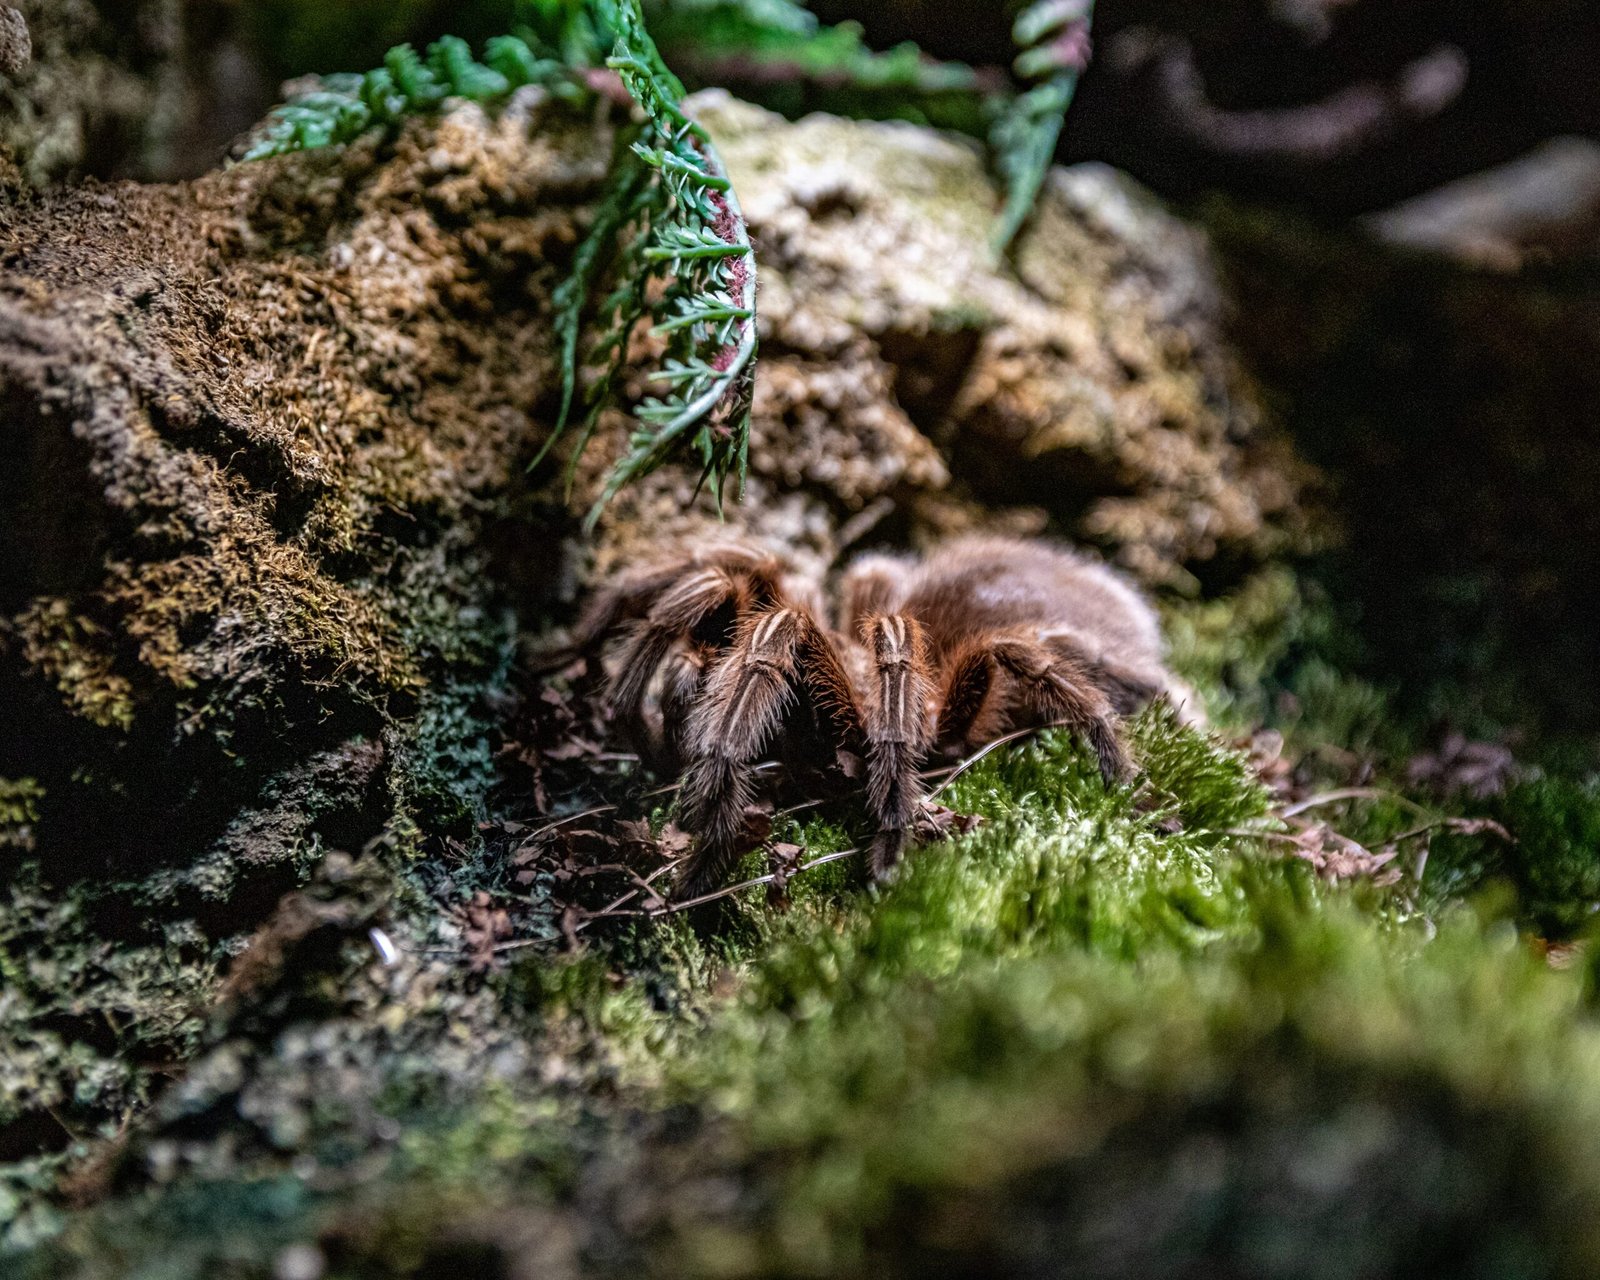 Are There Specific Health Issues I Should Watch For In Breeding Tarantulas?